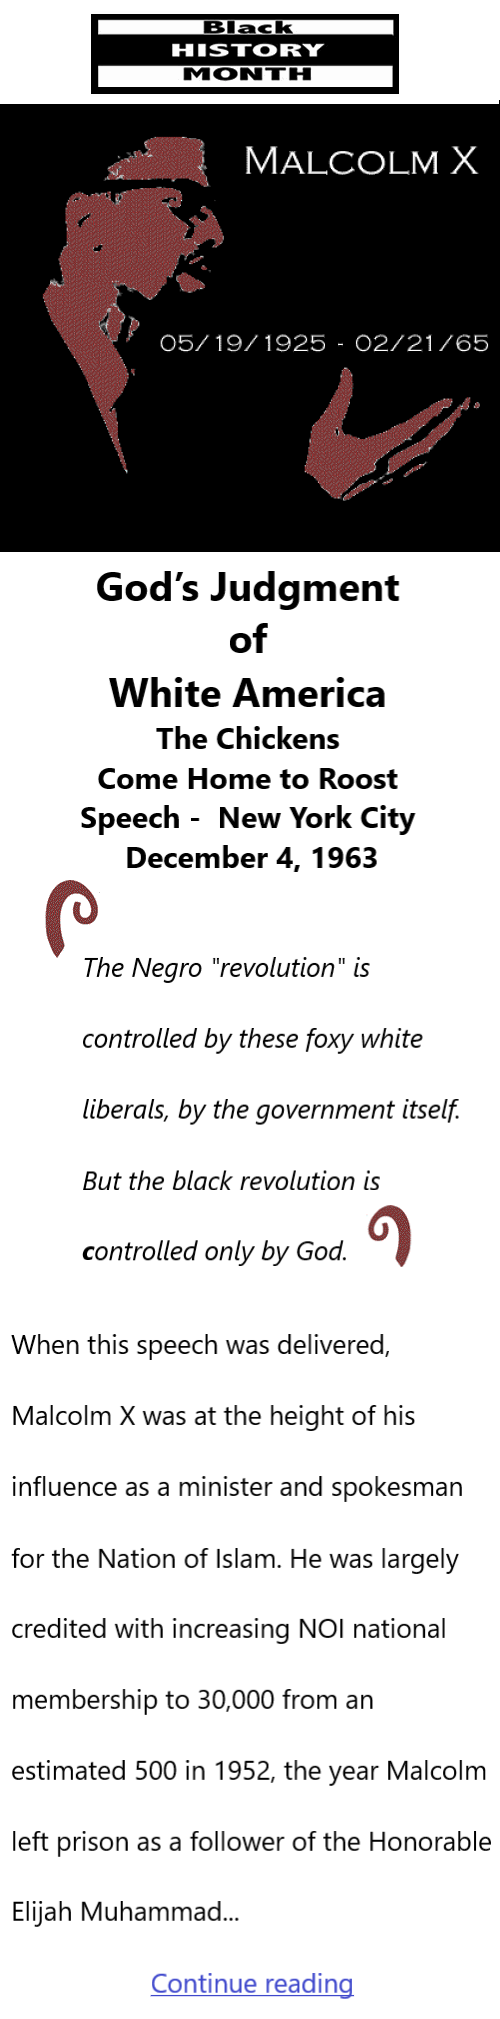 BlackCommentator.com Feb 16, 2023 - Issue 943: Black History Month - Malcolm X - God’s Judgment of White America (The Chickens Come Home to Roost) Speech - New York City, December 4, 1963